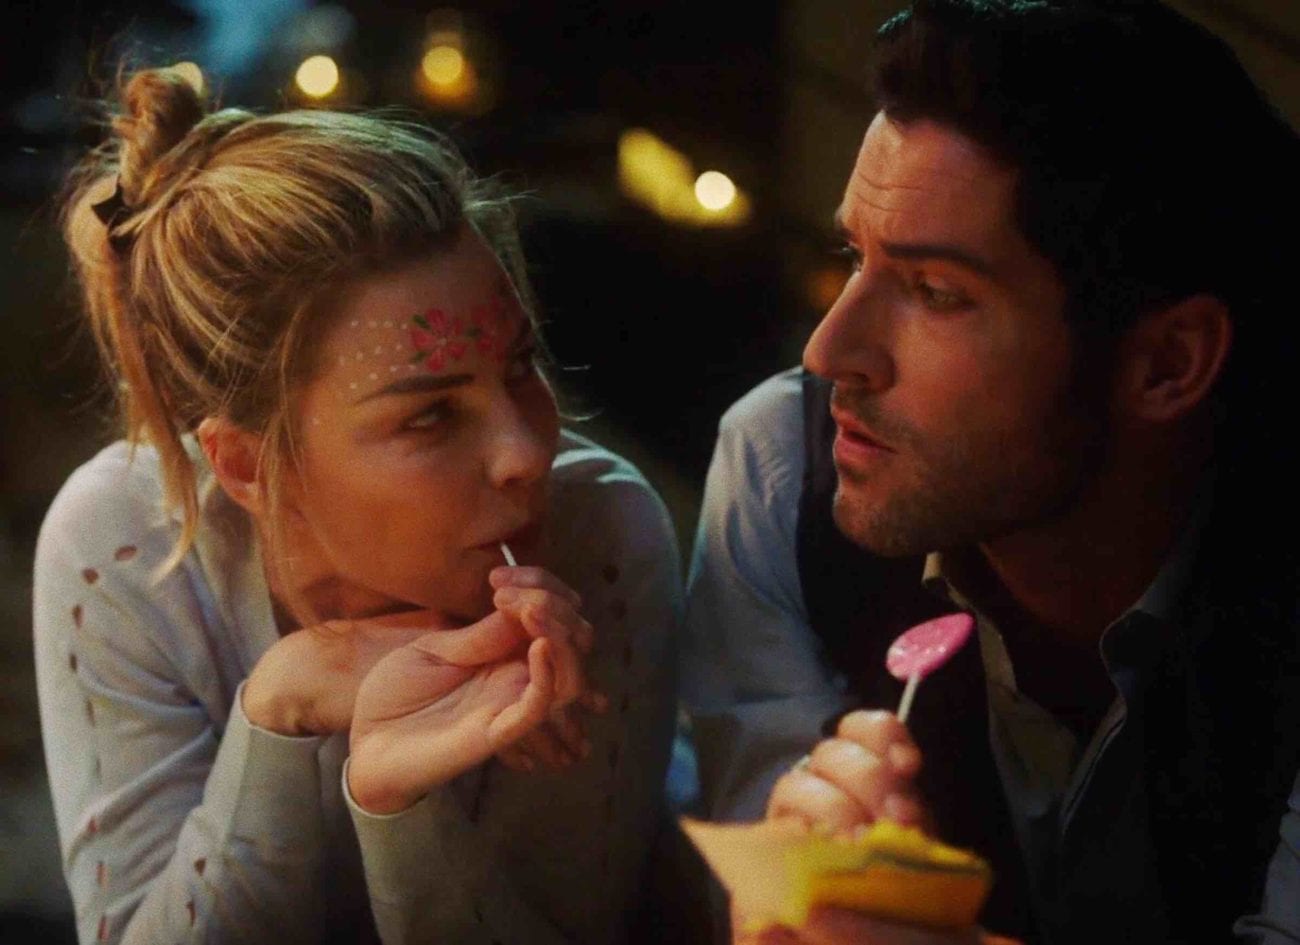 Take our quiz dedicated to the best 'ship from Netflix's 'Lucifer': Deckerstar! Let’s see how well you remember these key moments of the romance.